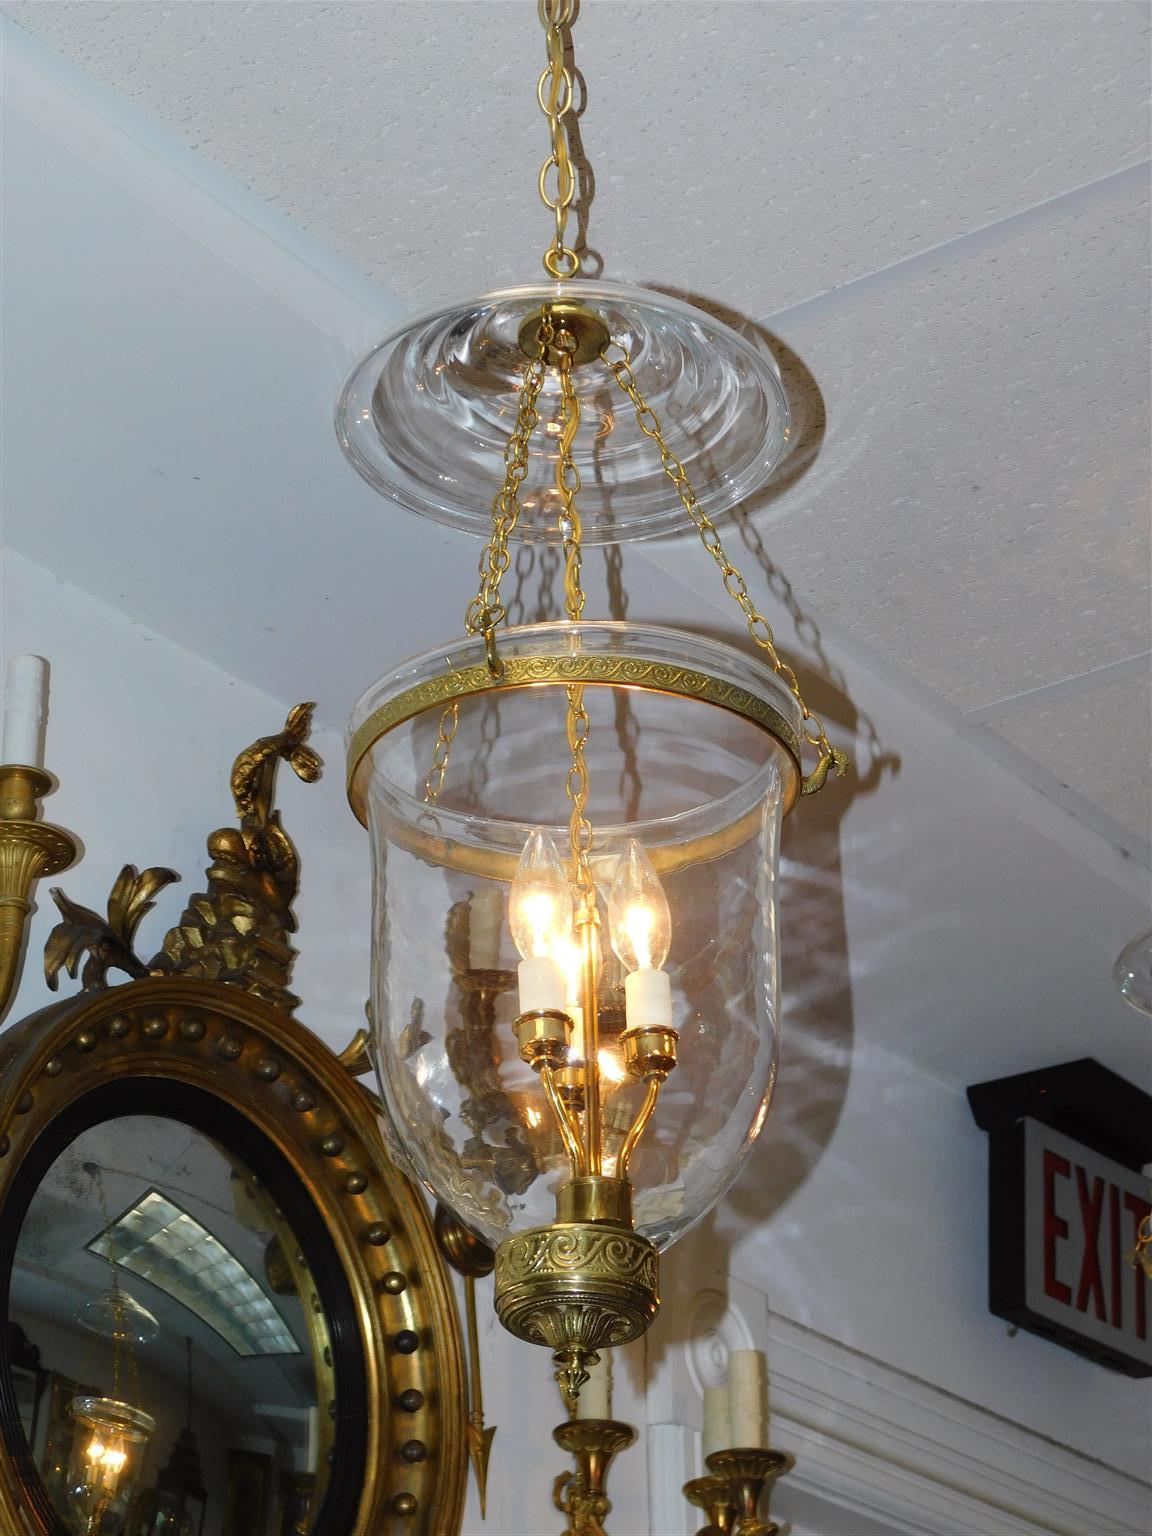 North American Pair of American Brass and Bell Jar Hanging Glass Lanterns, Circa 1880